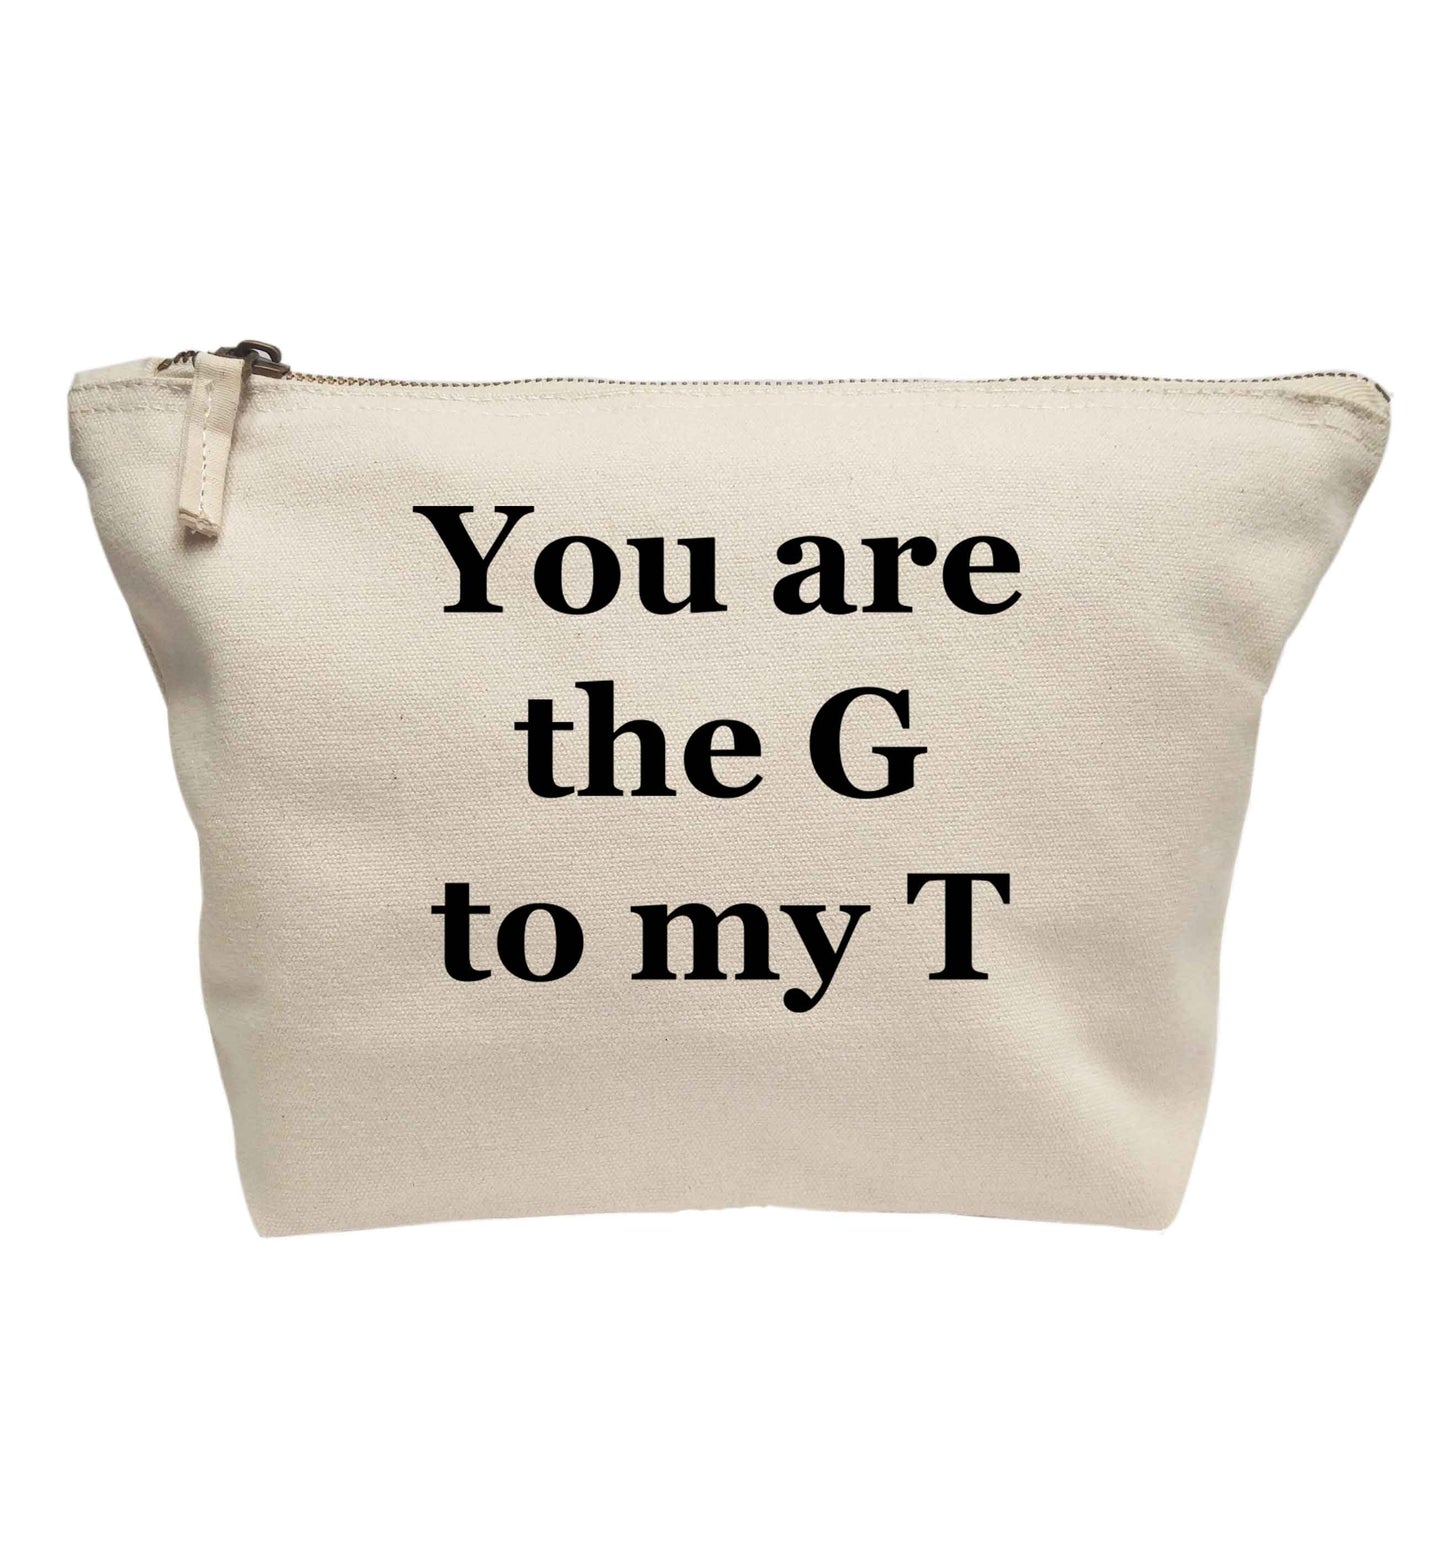 You are the G to my T | makeup / wash bag